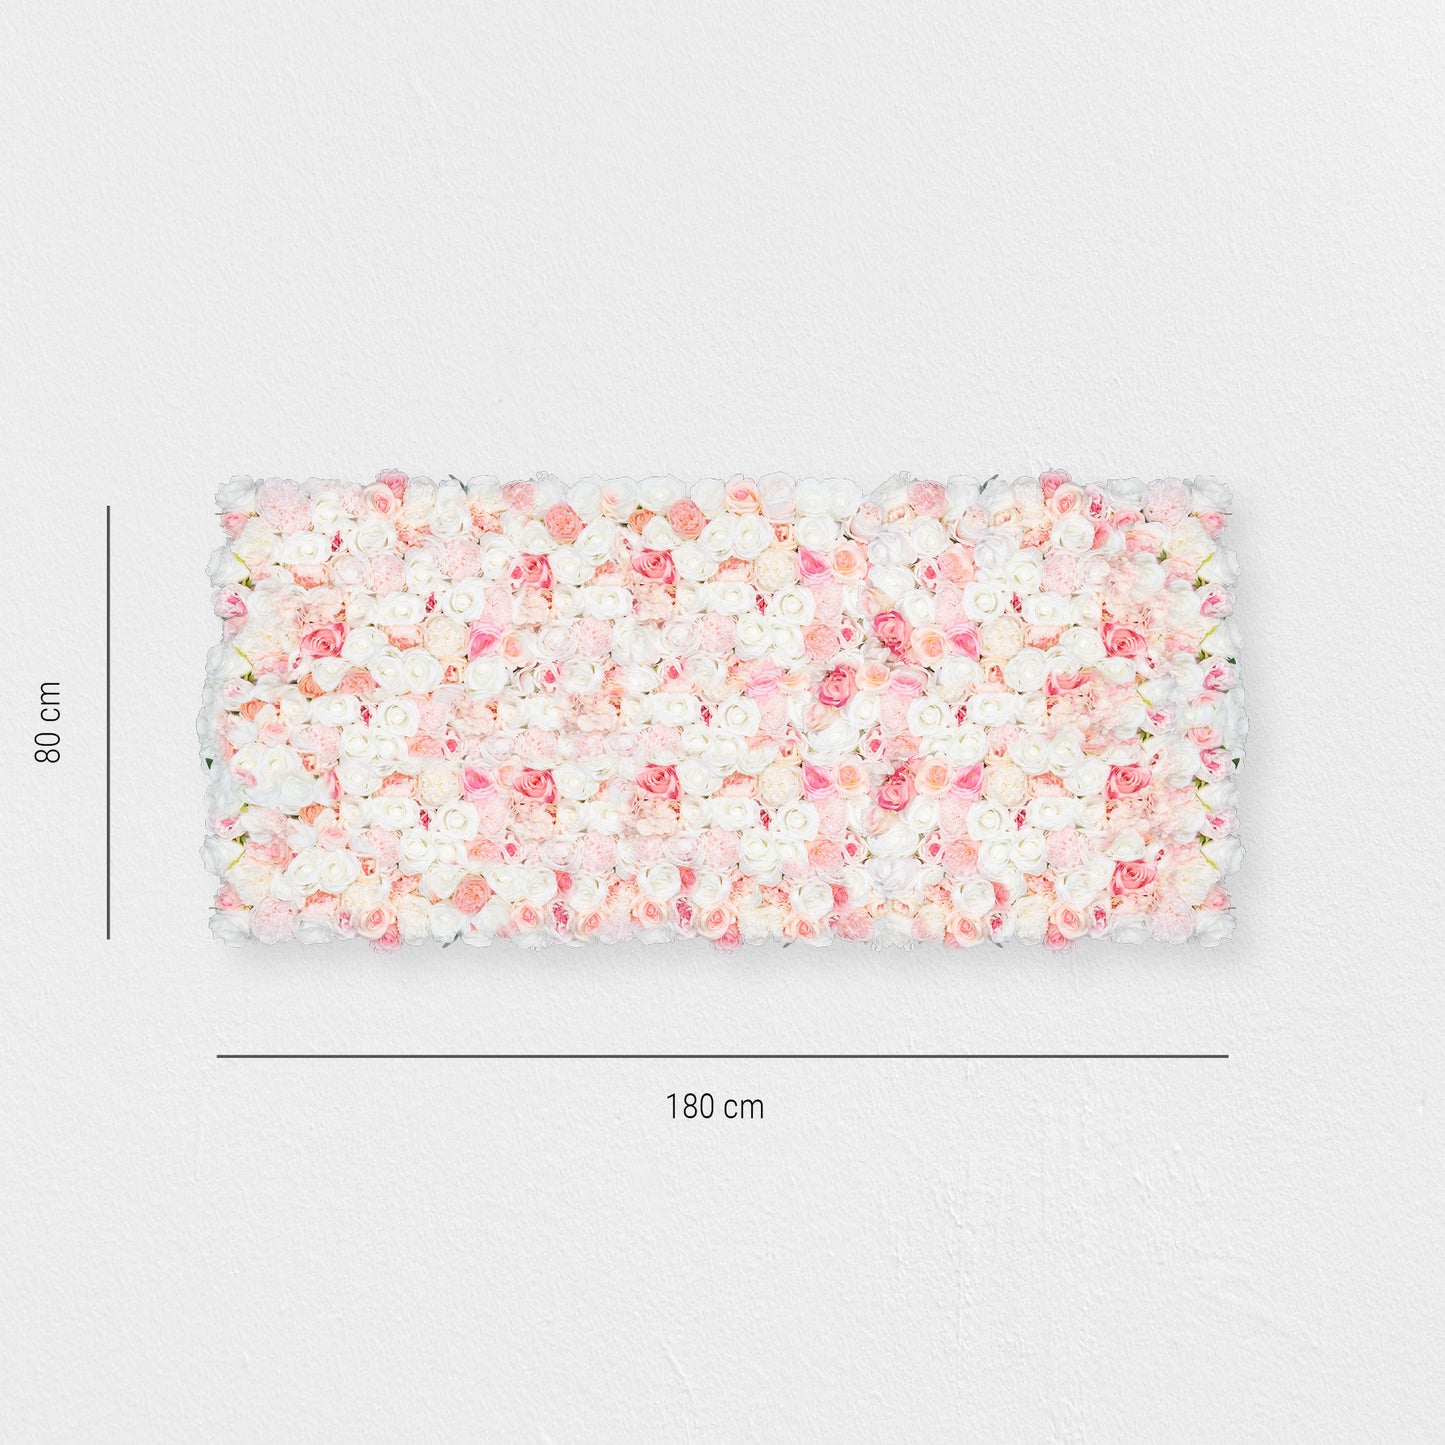 Flower wall "COTTON CANDY" made of Realtouch artificial plants